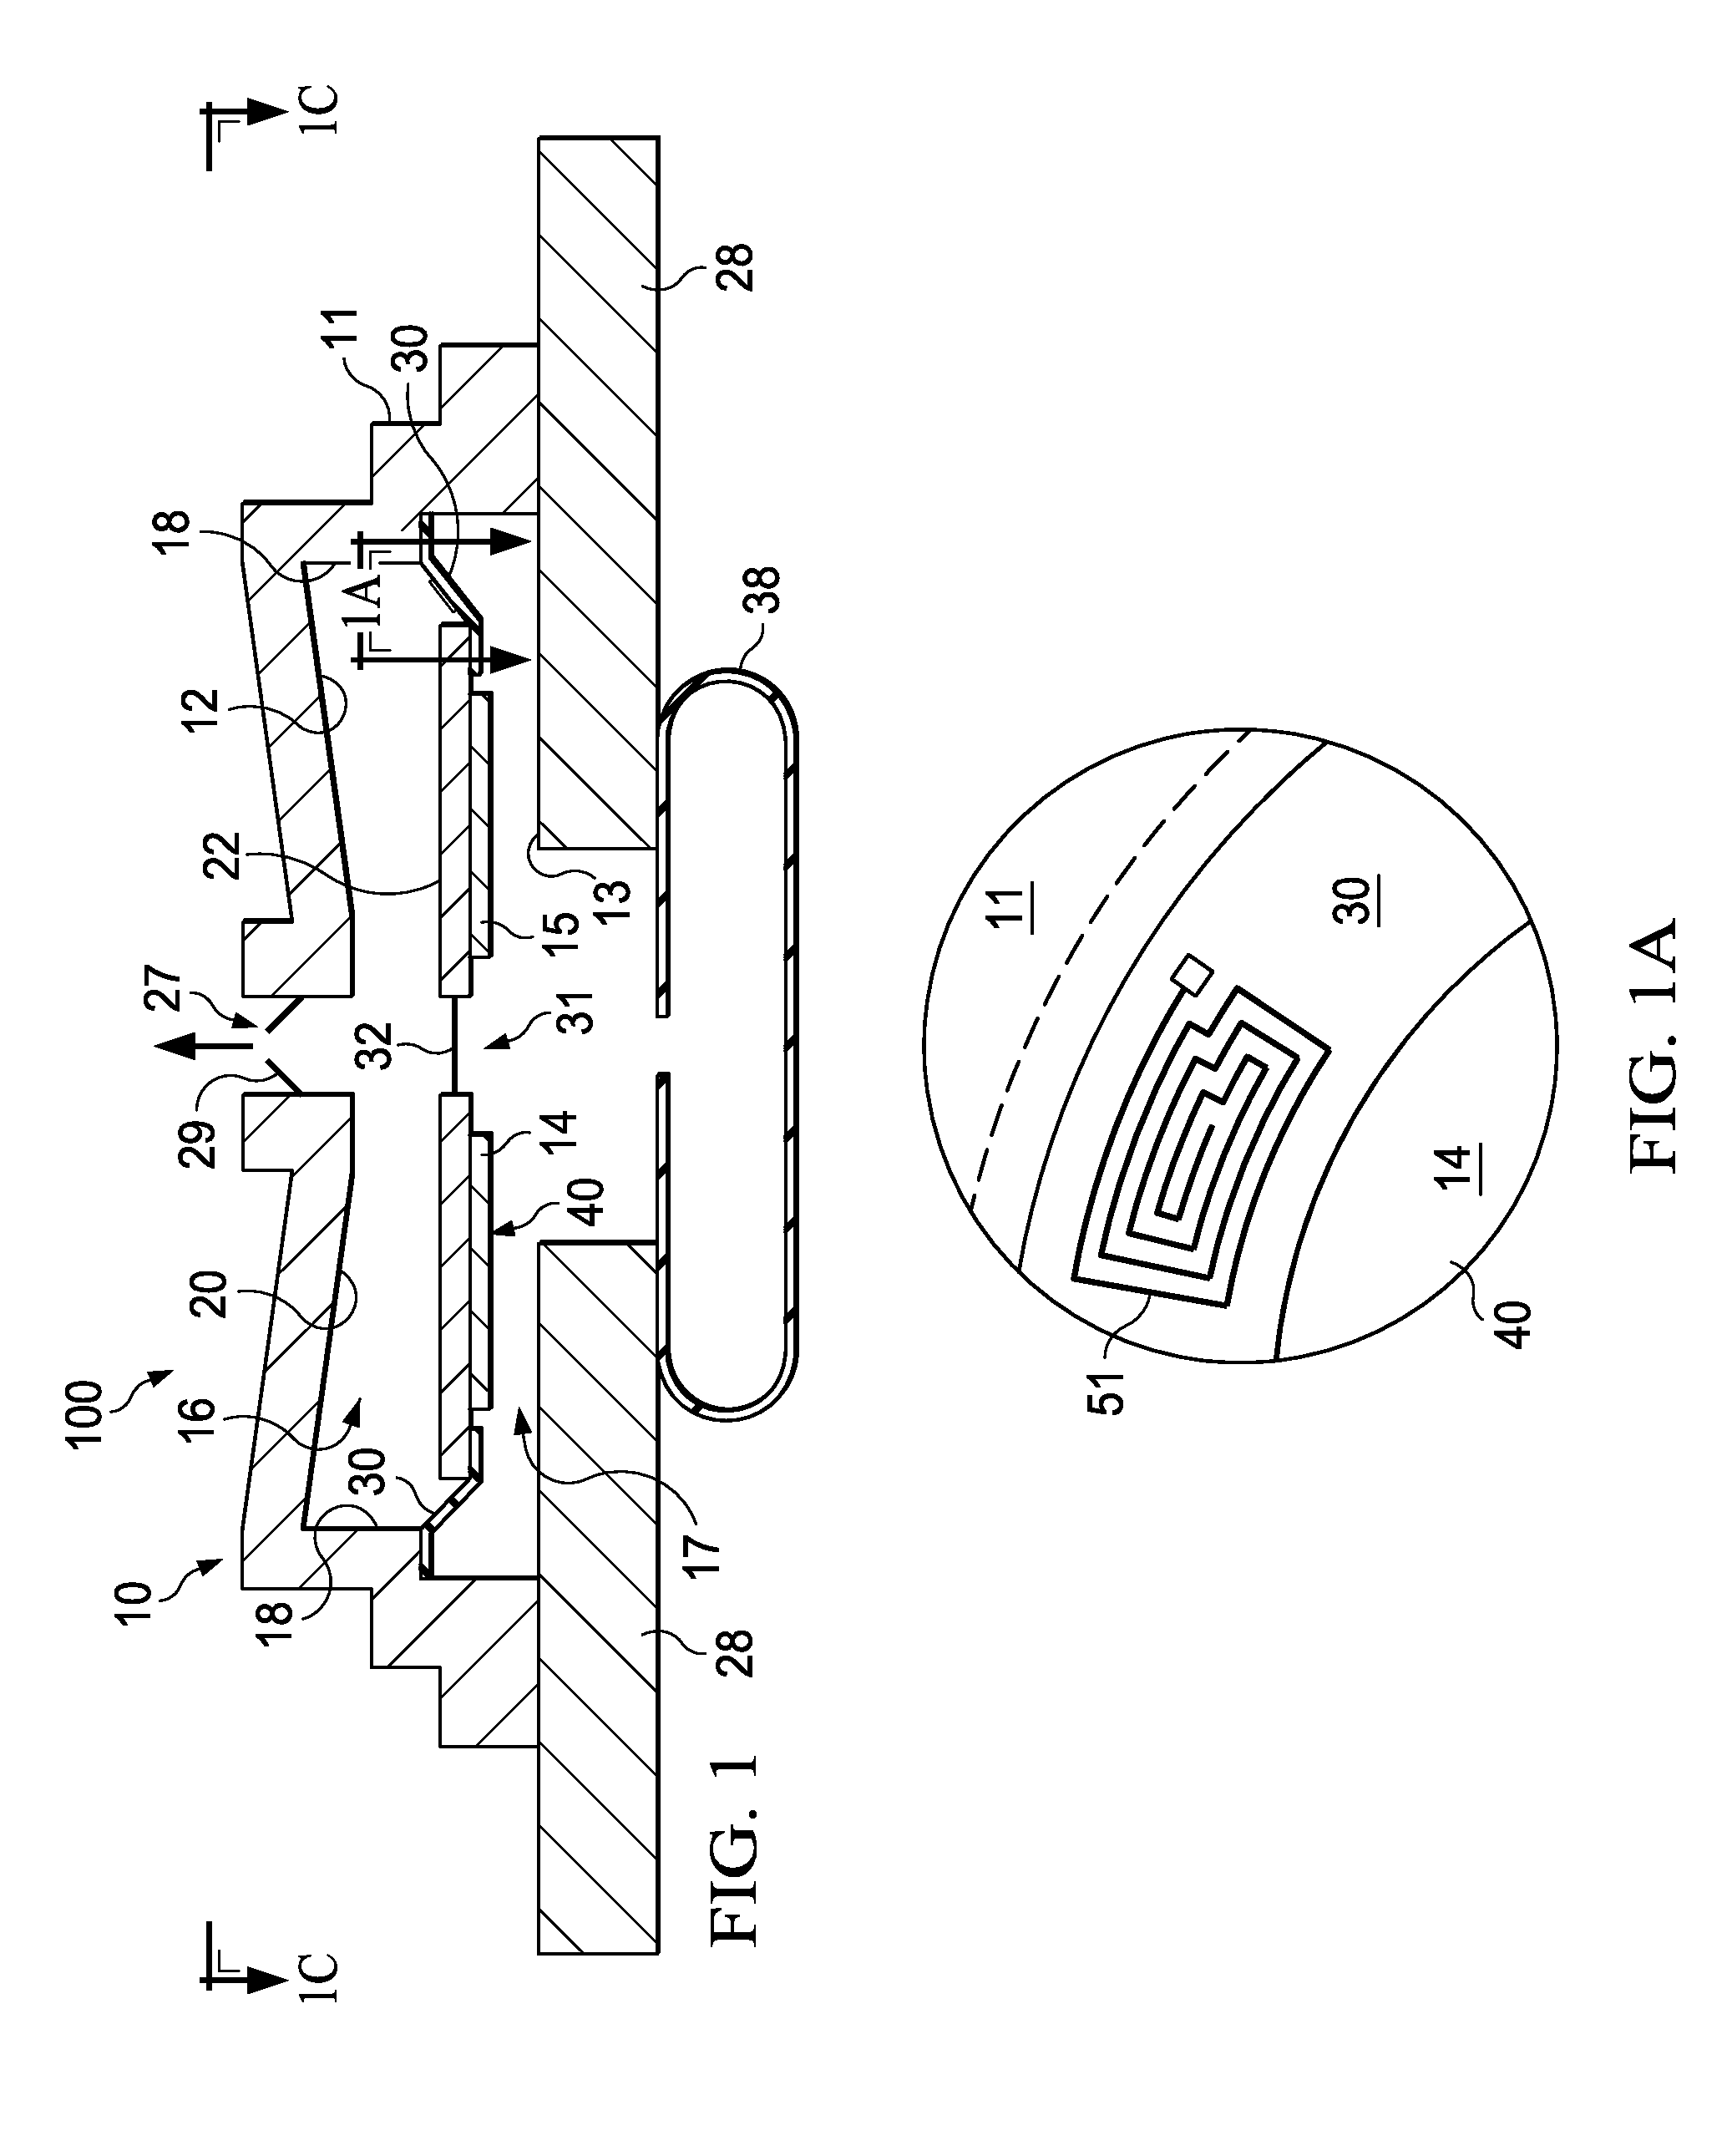 Systems and methods for monitoring a disc pump system using RFID